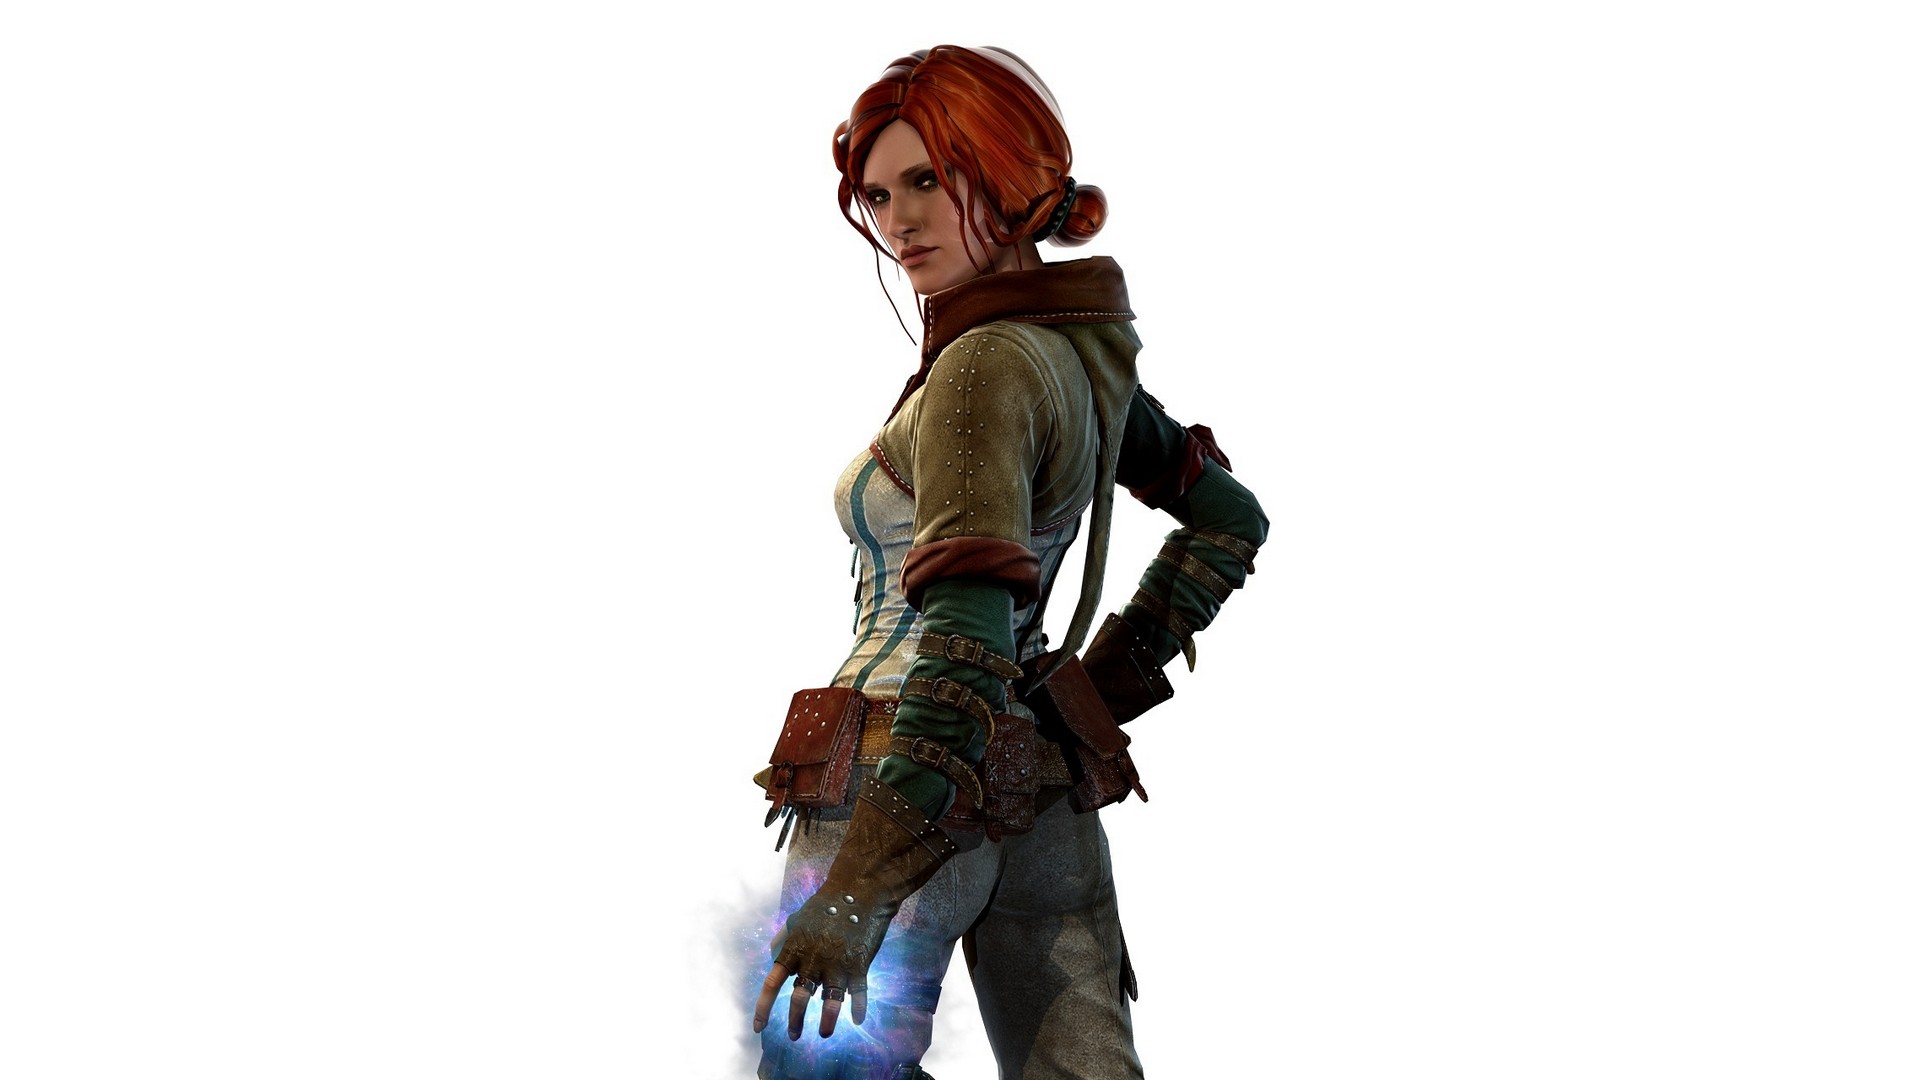 General 1920x1080 Triss Merigold The Witcher video game characters The Witcher 2: Assassins of Kings RPG video games PC gaming redhead white background fantasy girl video game girls